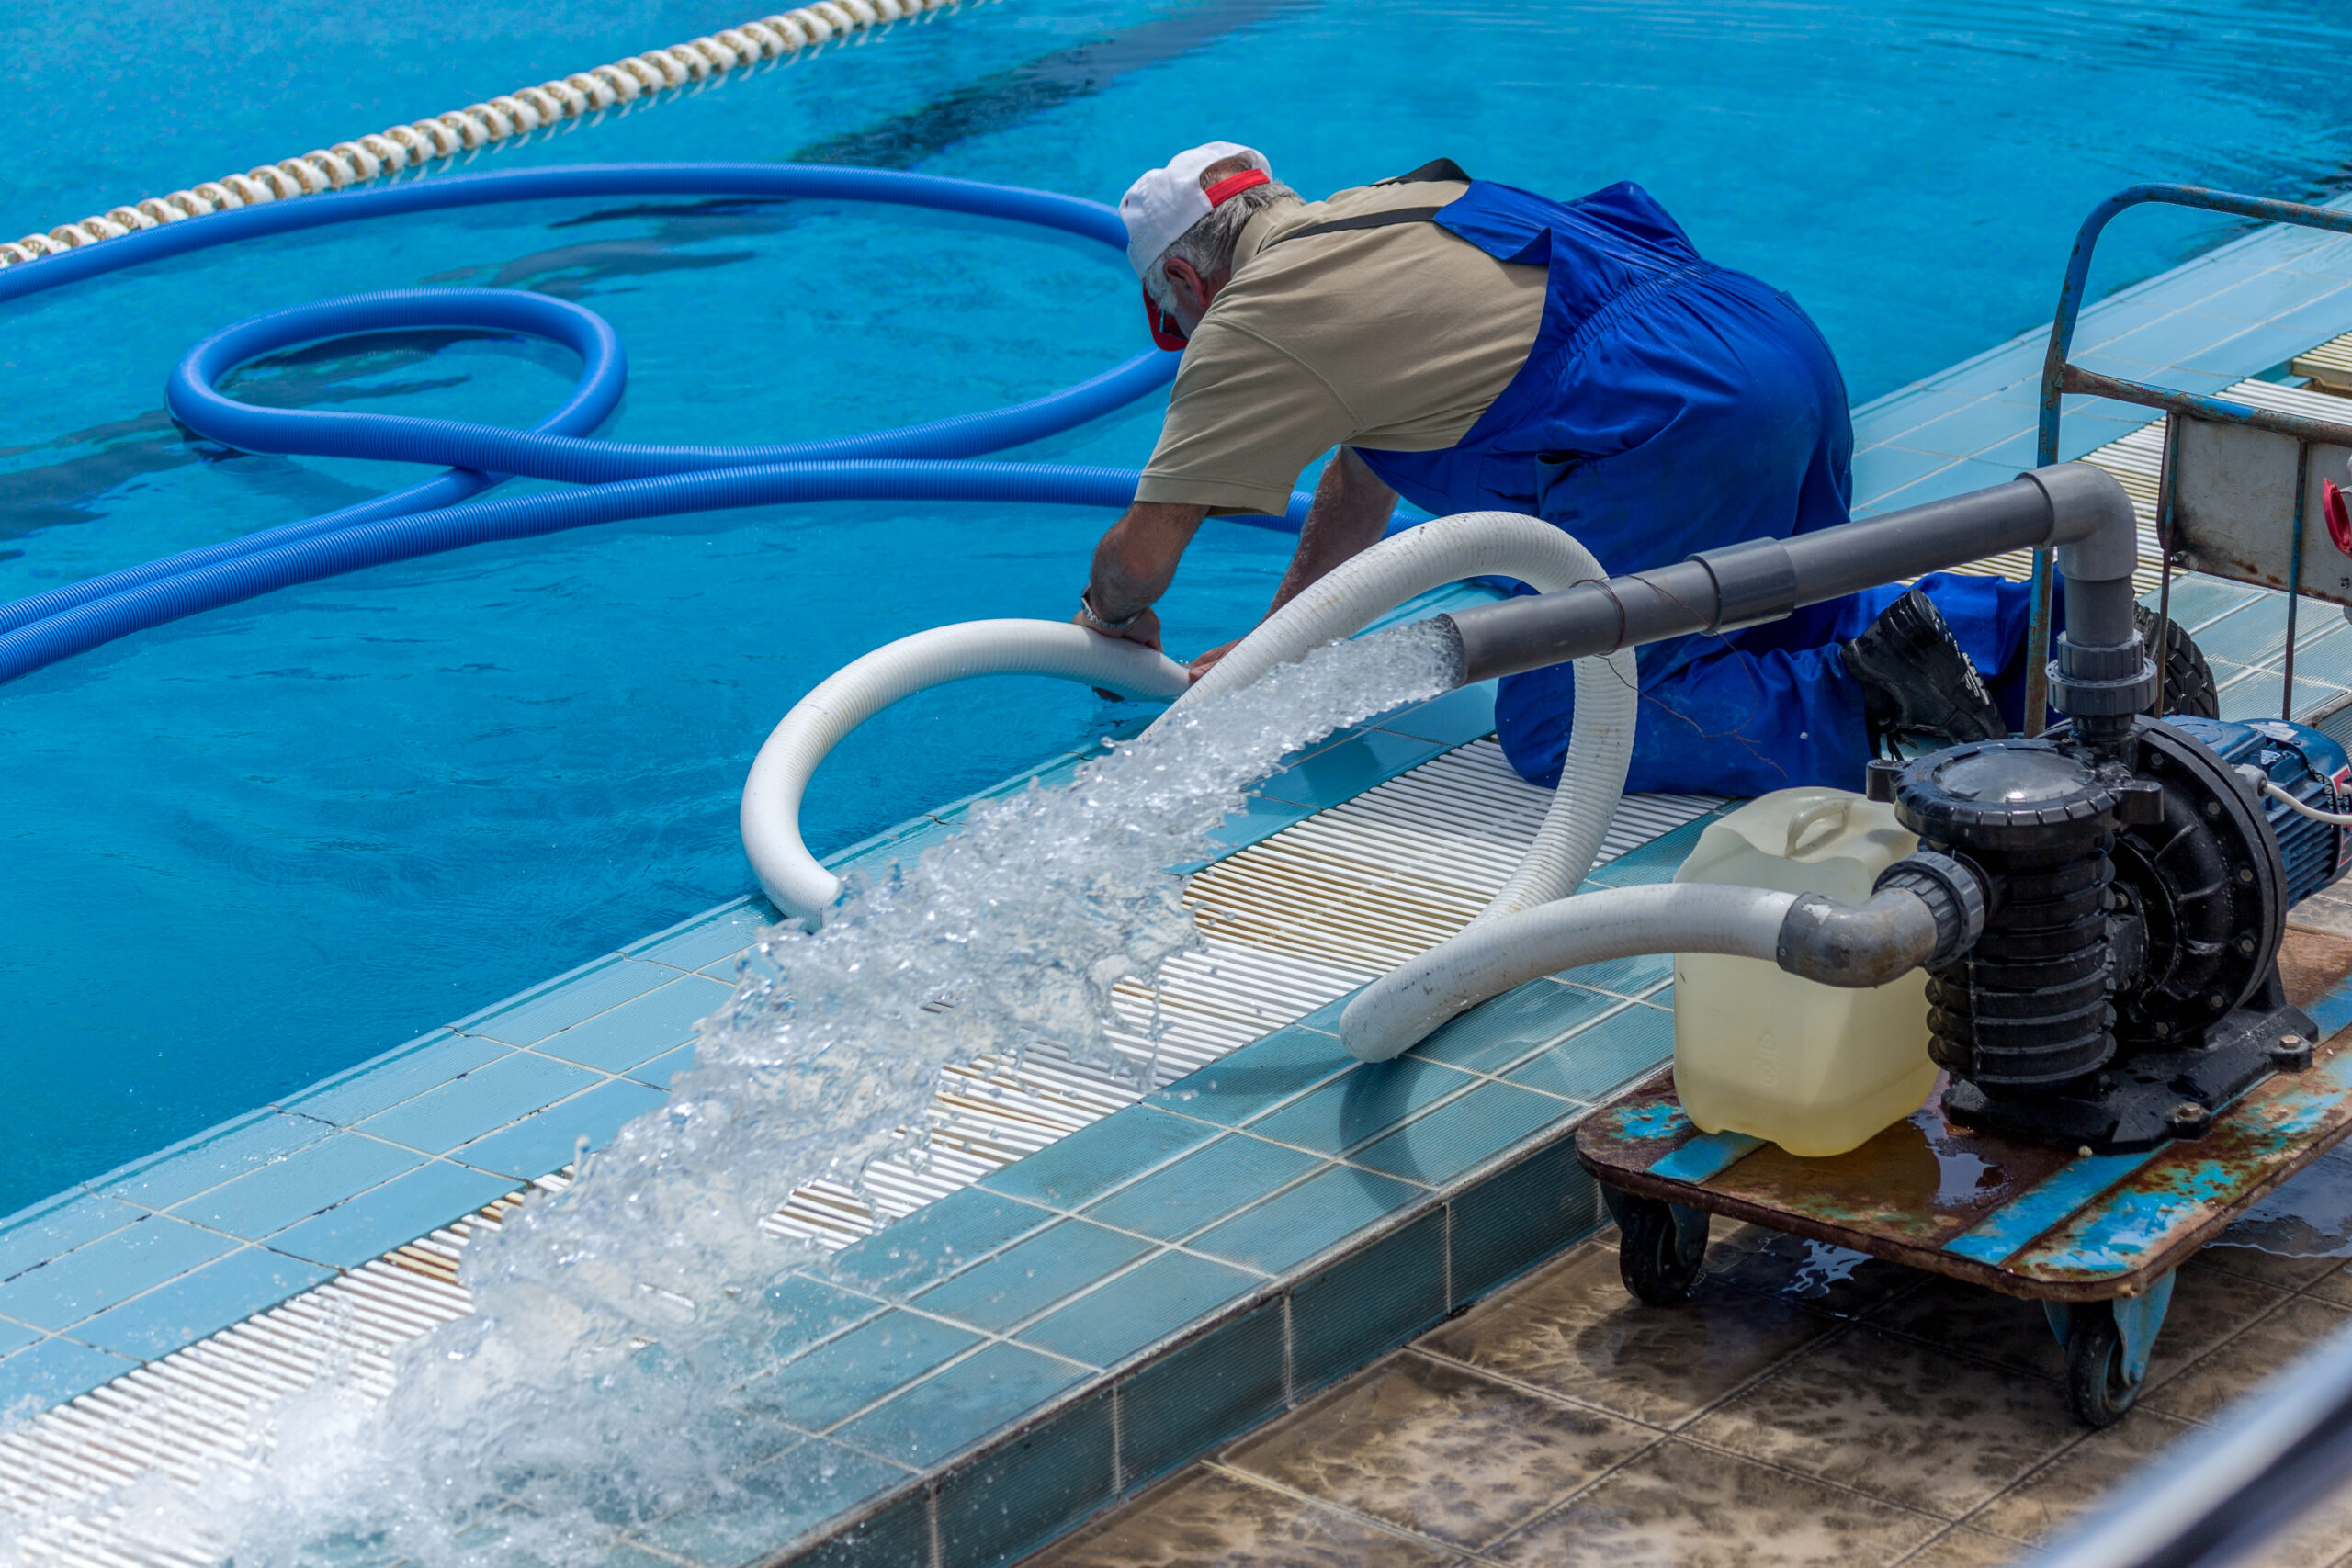 Professional services for pools encompass a range of specialized offerings to ensure the proper maintenance, repair, and upkeep of swimming pools.